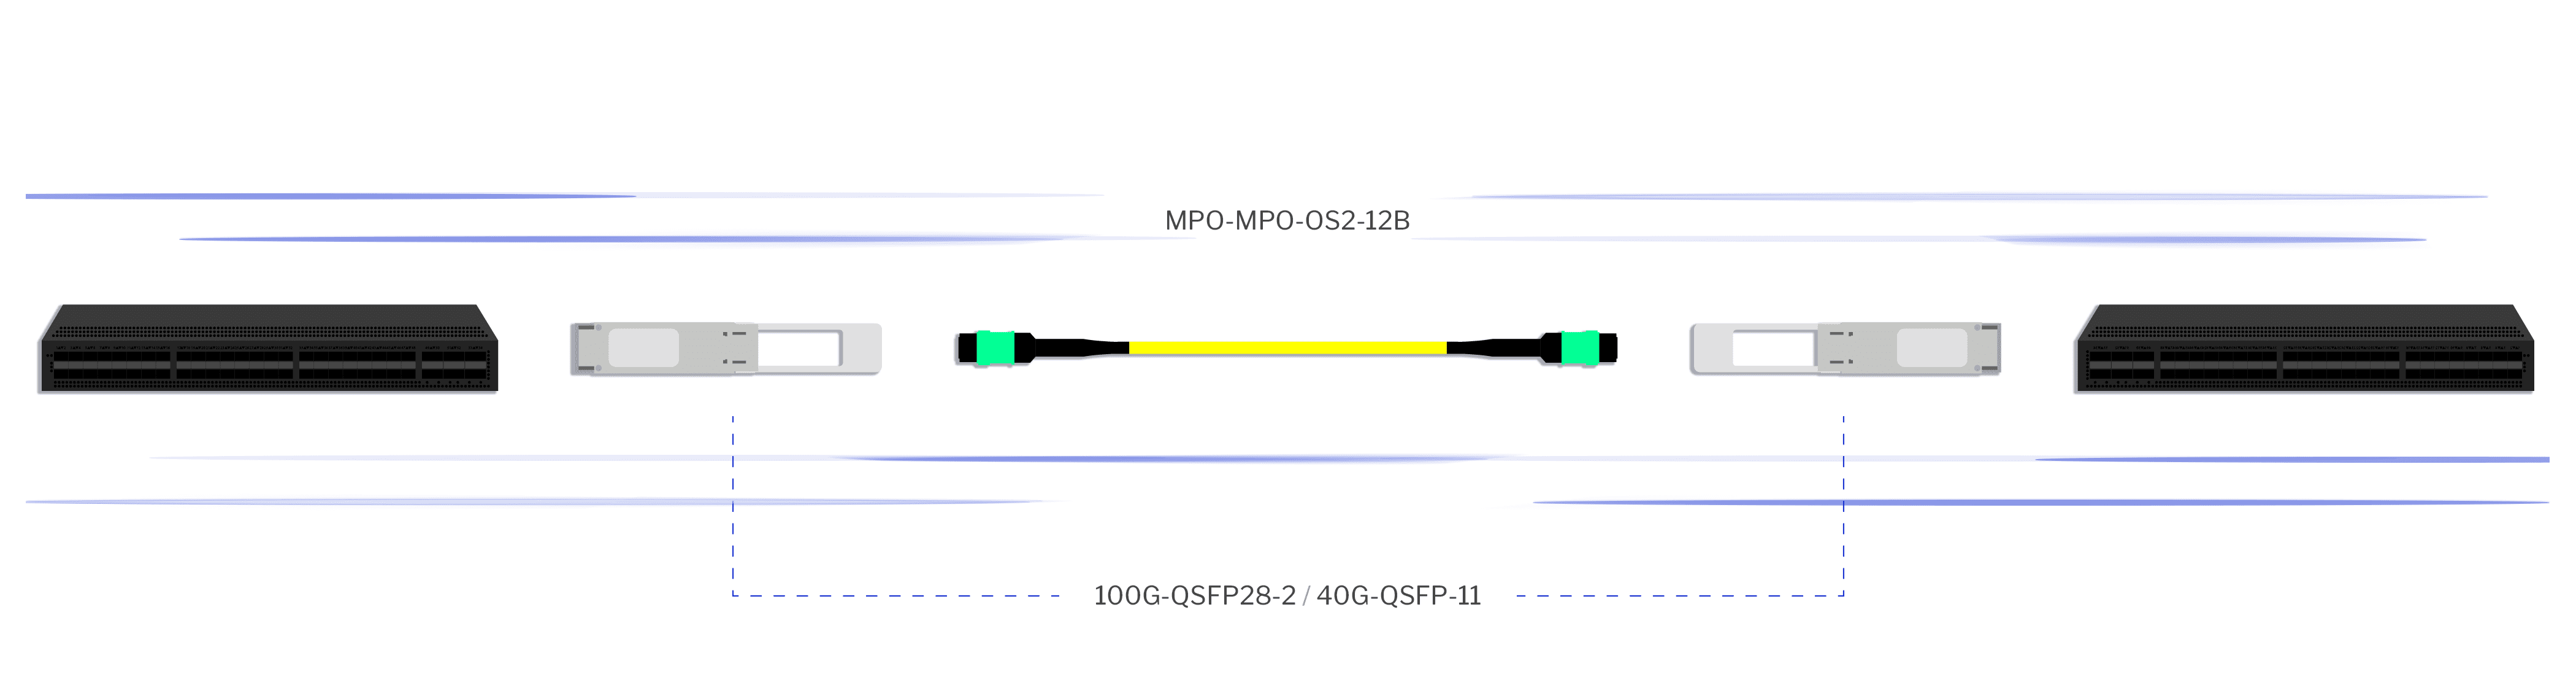 MPO-MPO-OS2-12B Patch Cable Connectivity Solution